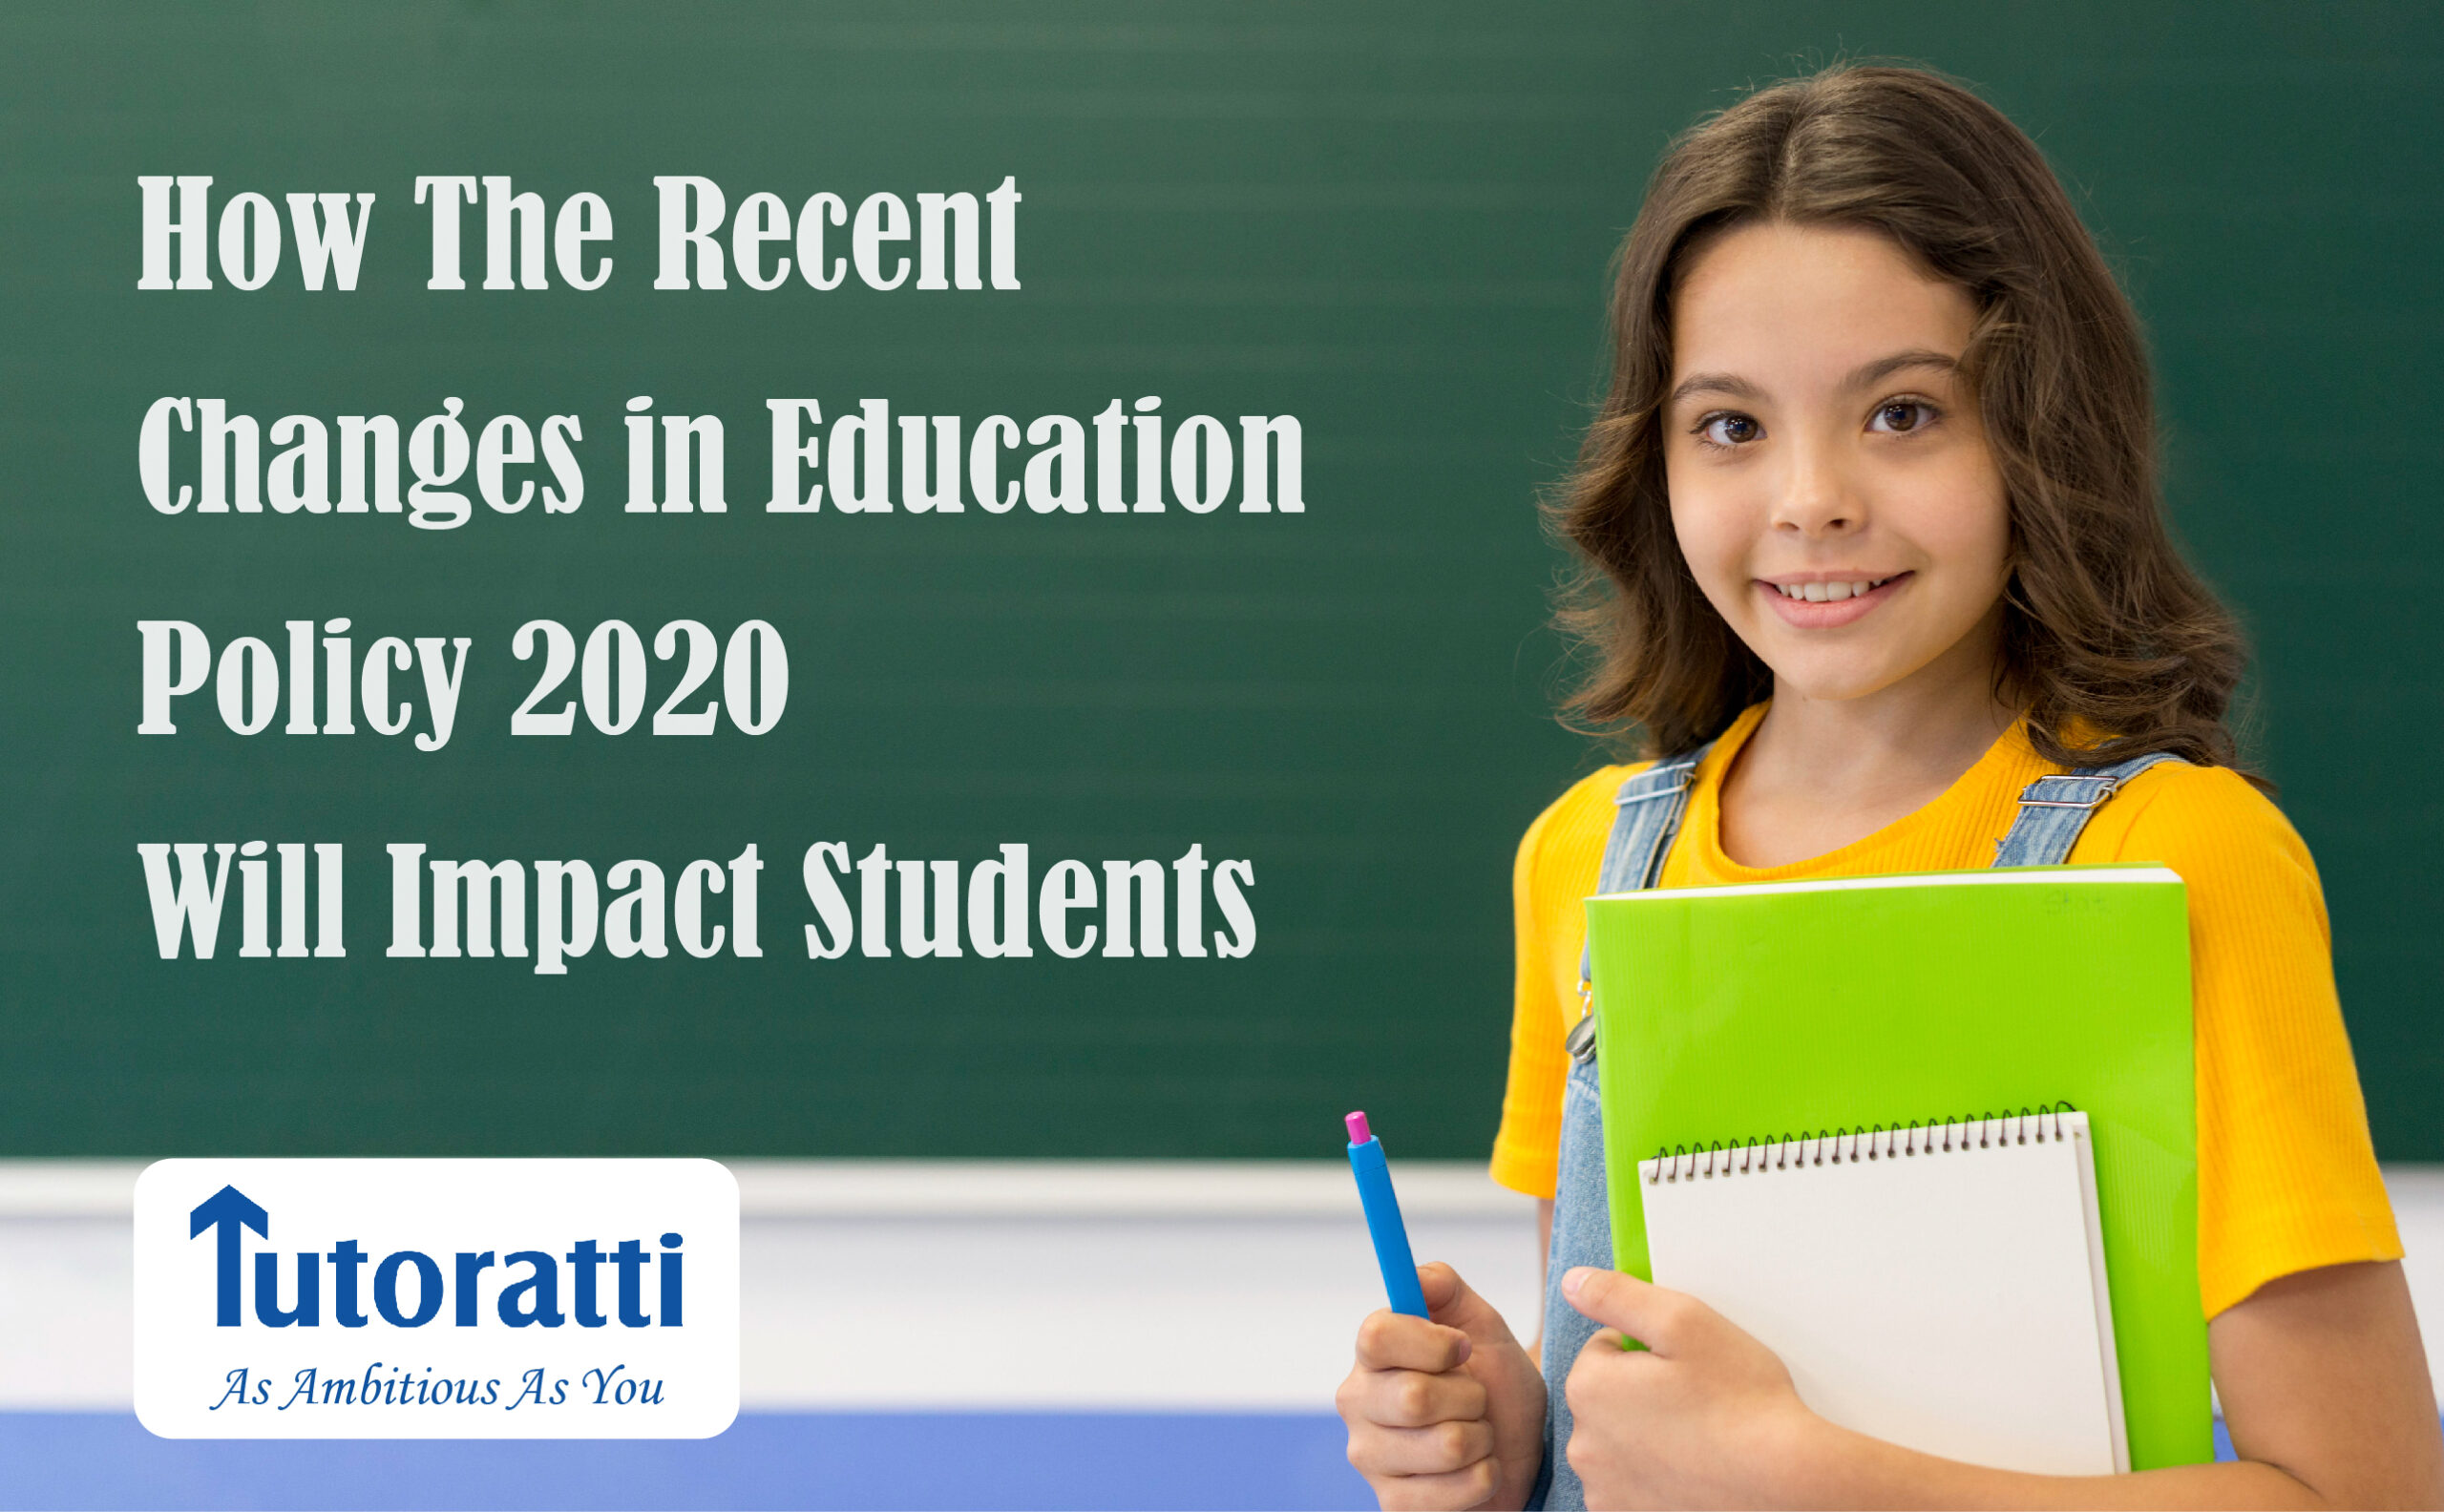 How The Recent Changes in Education Policy 2020 Will Impact Students